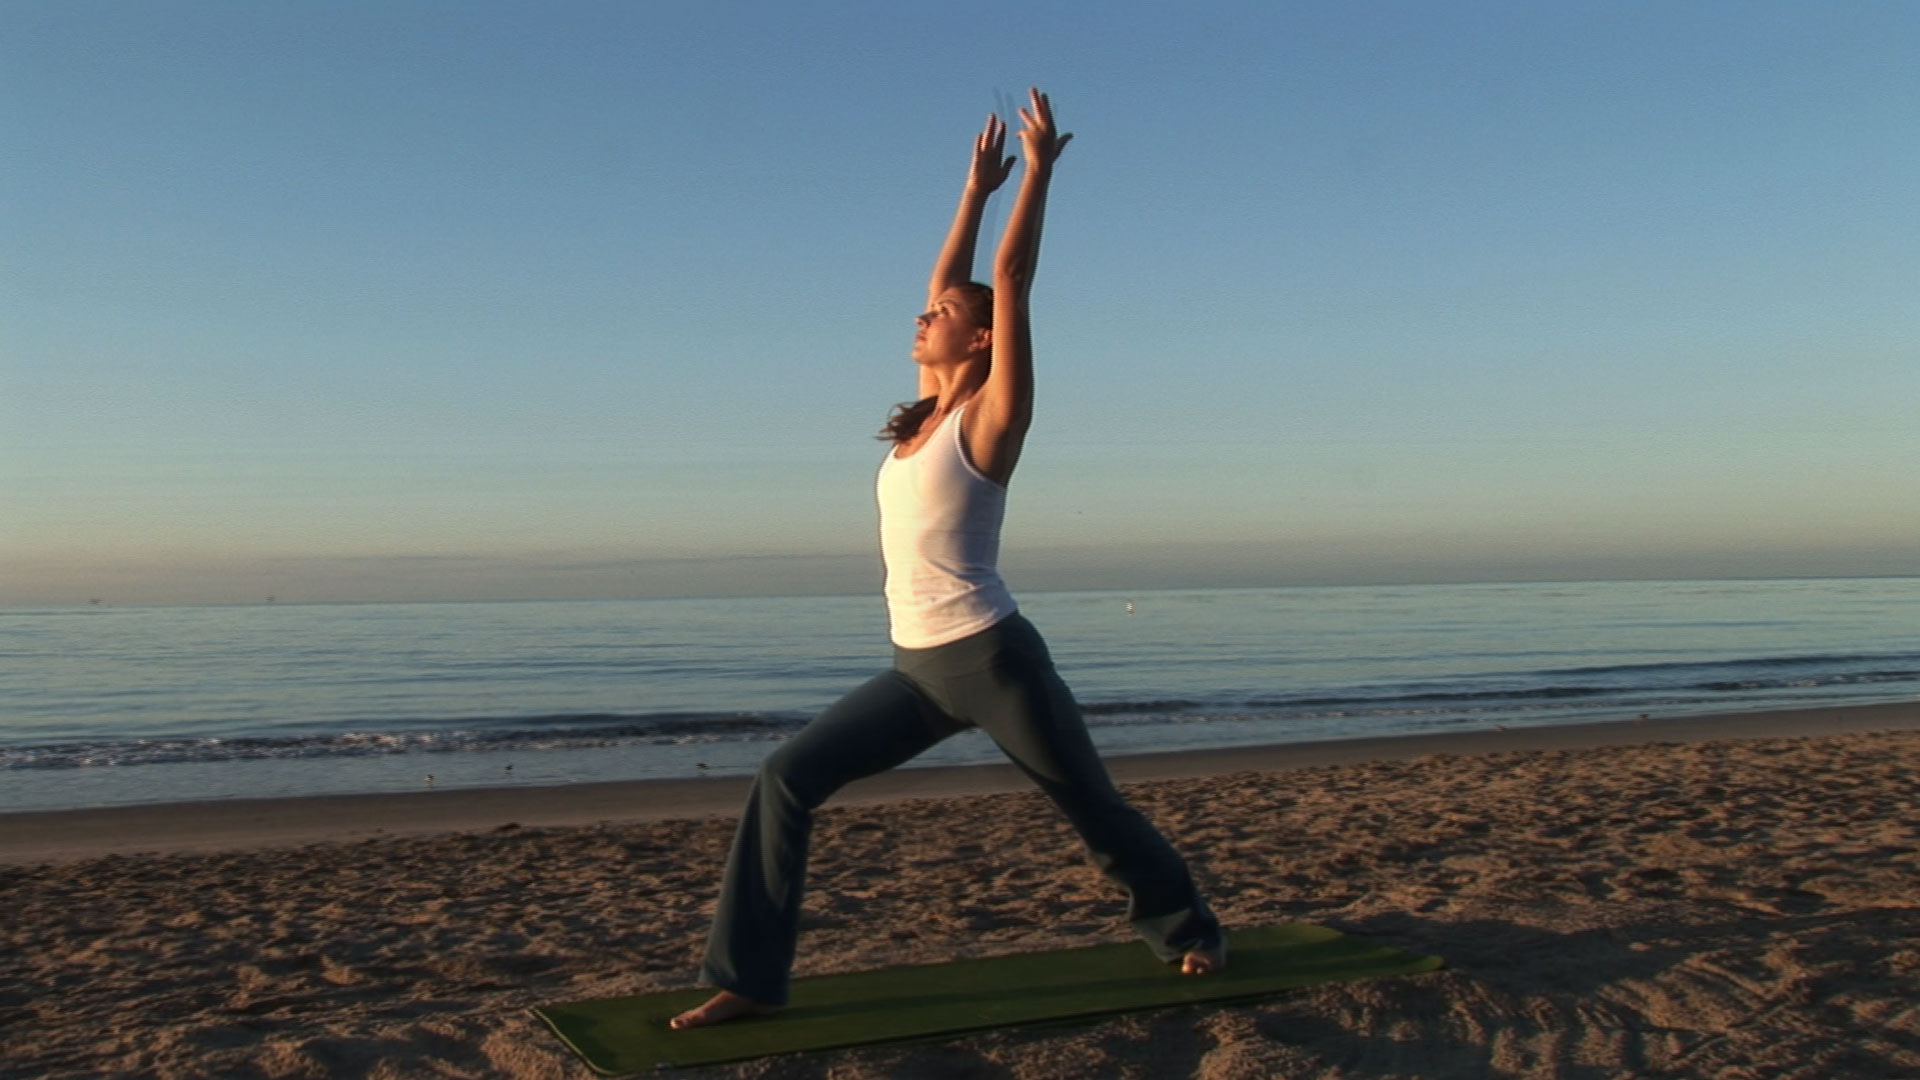 Beginners Yoga Video Offers Good Instruction 2